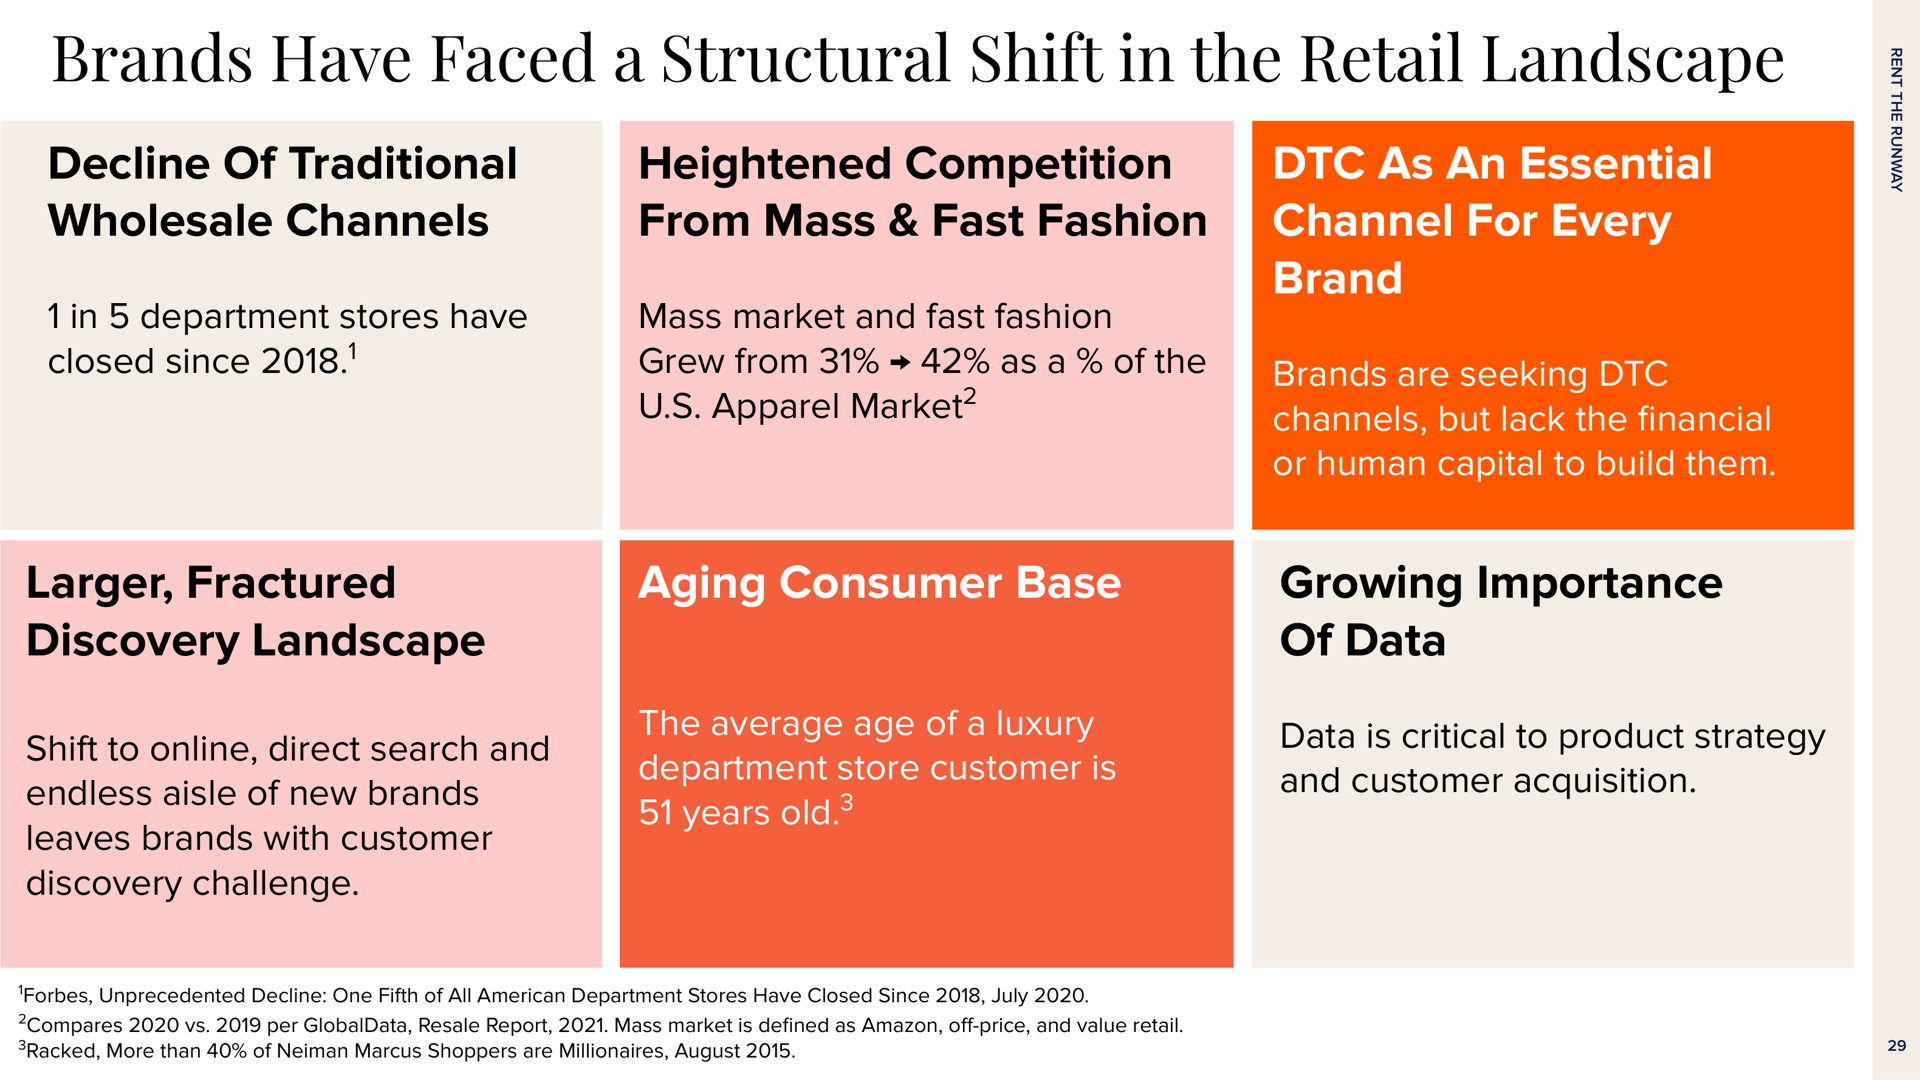 brands have faced a structural shift in the retail landscape decline of traditional wholesale channels heightened competition from mass fast fashion as an essential channel for every brand fractured discovery landscape aging consumer base growing importance of data | Rent The Runway